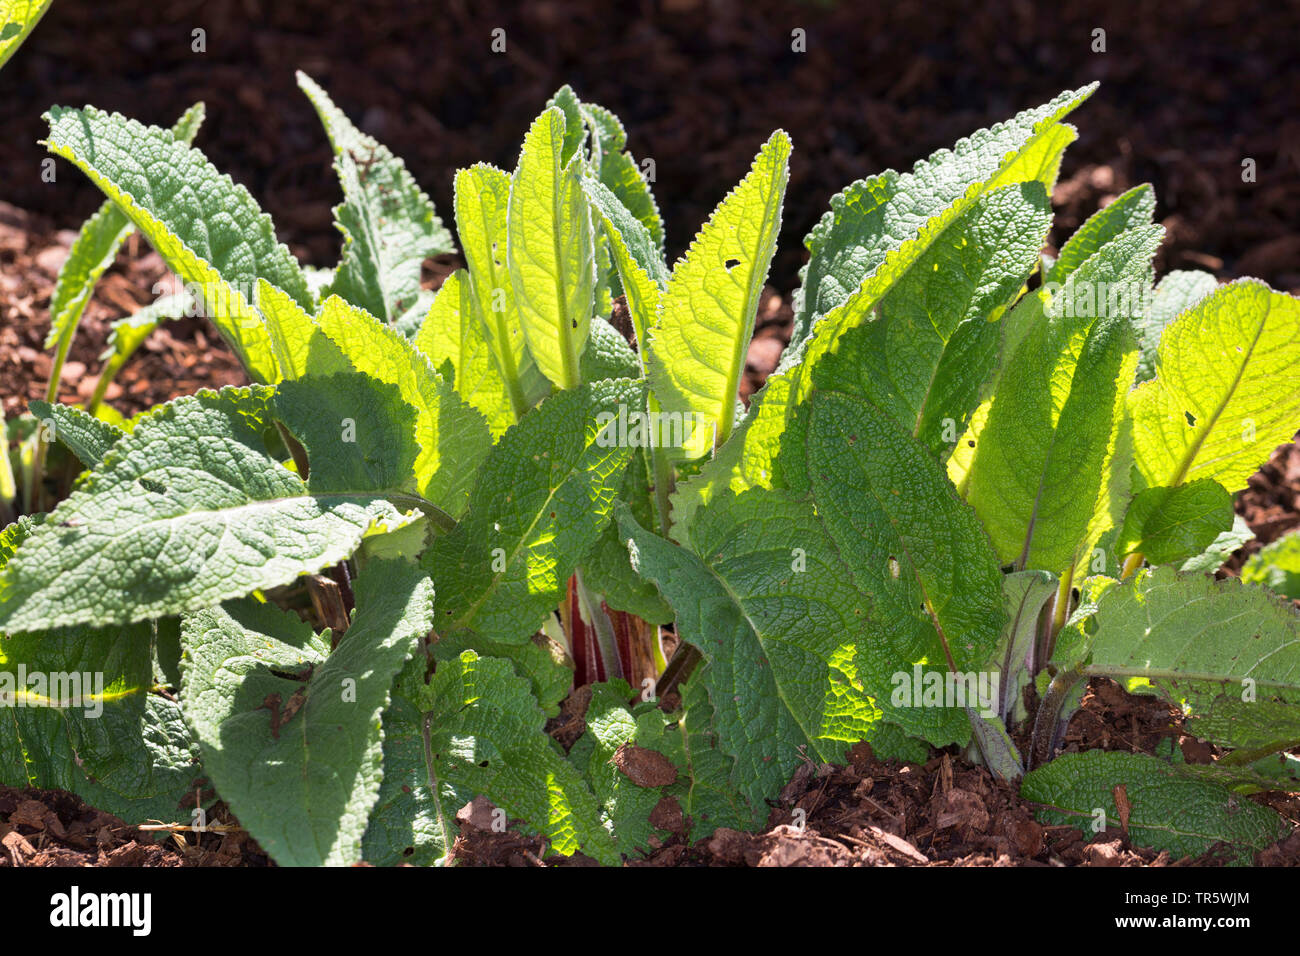 clasping-leaf mullein (Verbascum phlomoides), fresh leaves, Germany Stock Photo